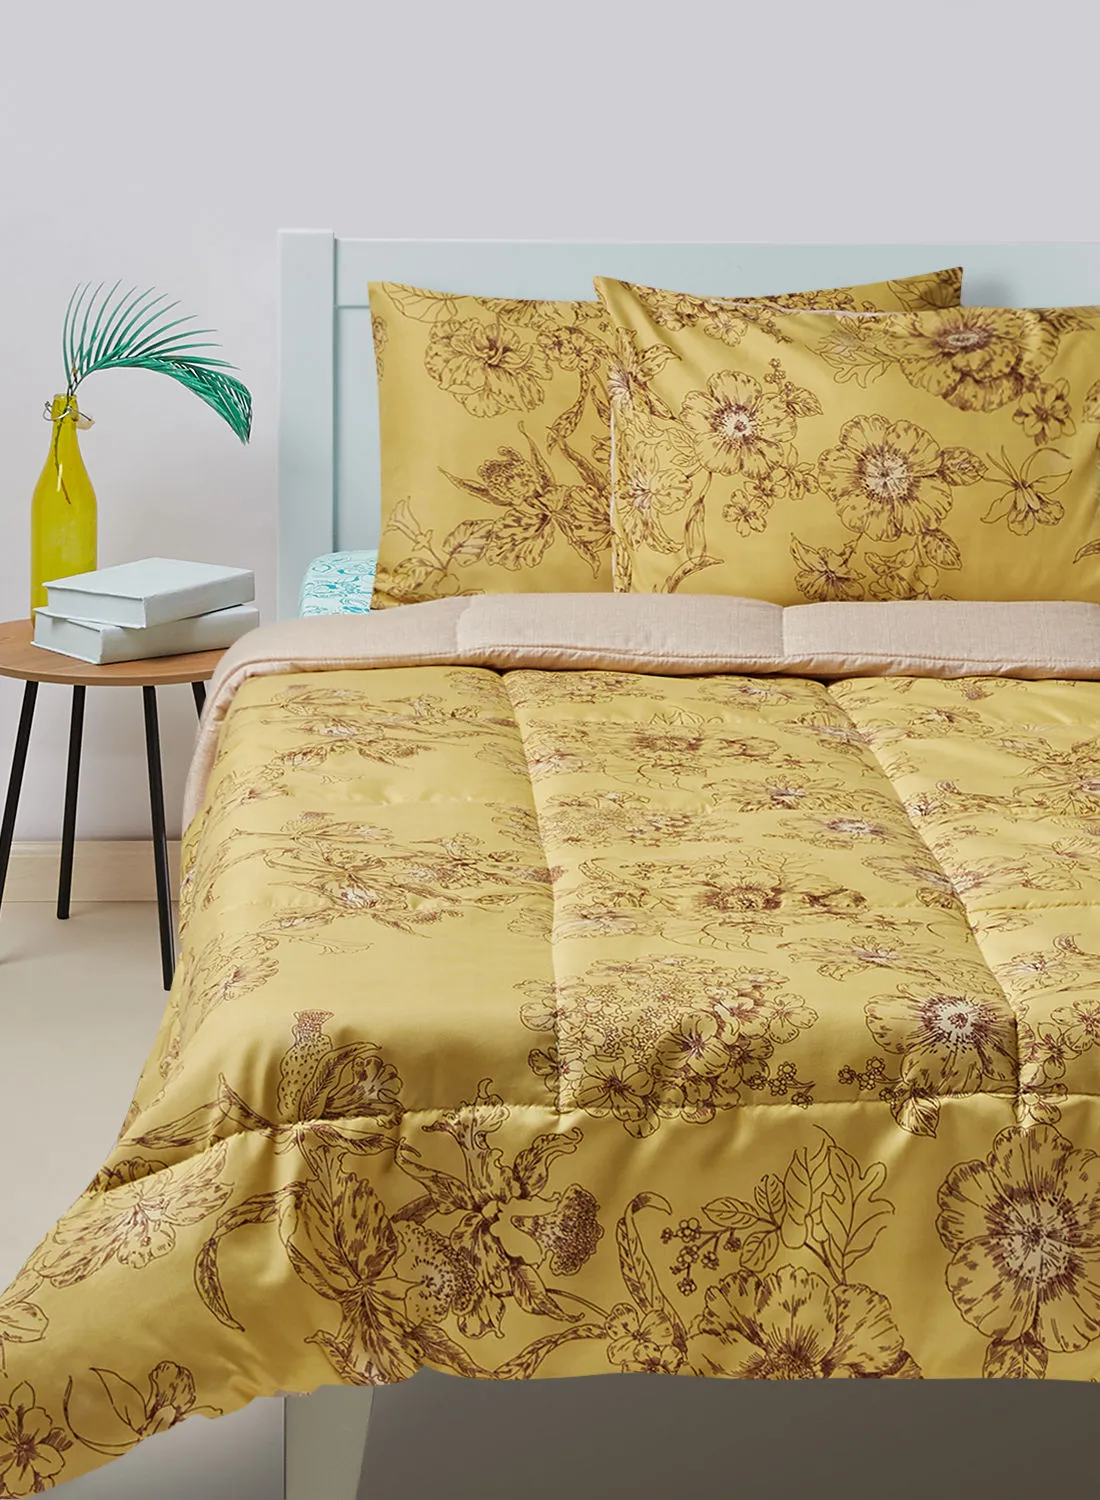 Amal Comforter Set King Size All Season Everyday Use Bedding Set Extra Soft Microfiber 3 Pieces 1 Comforter 2 Pillow Covers  Gold